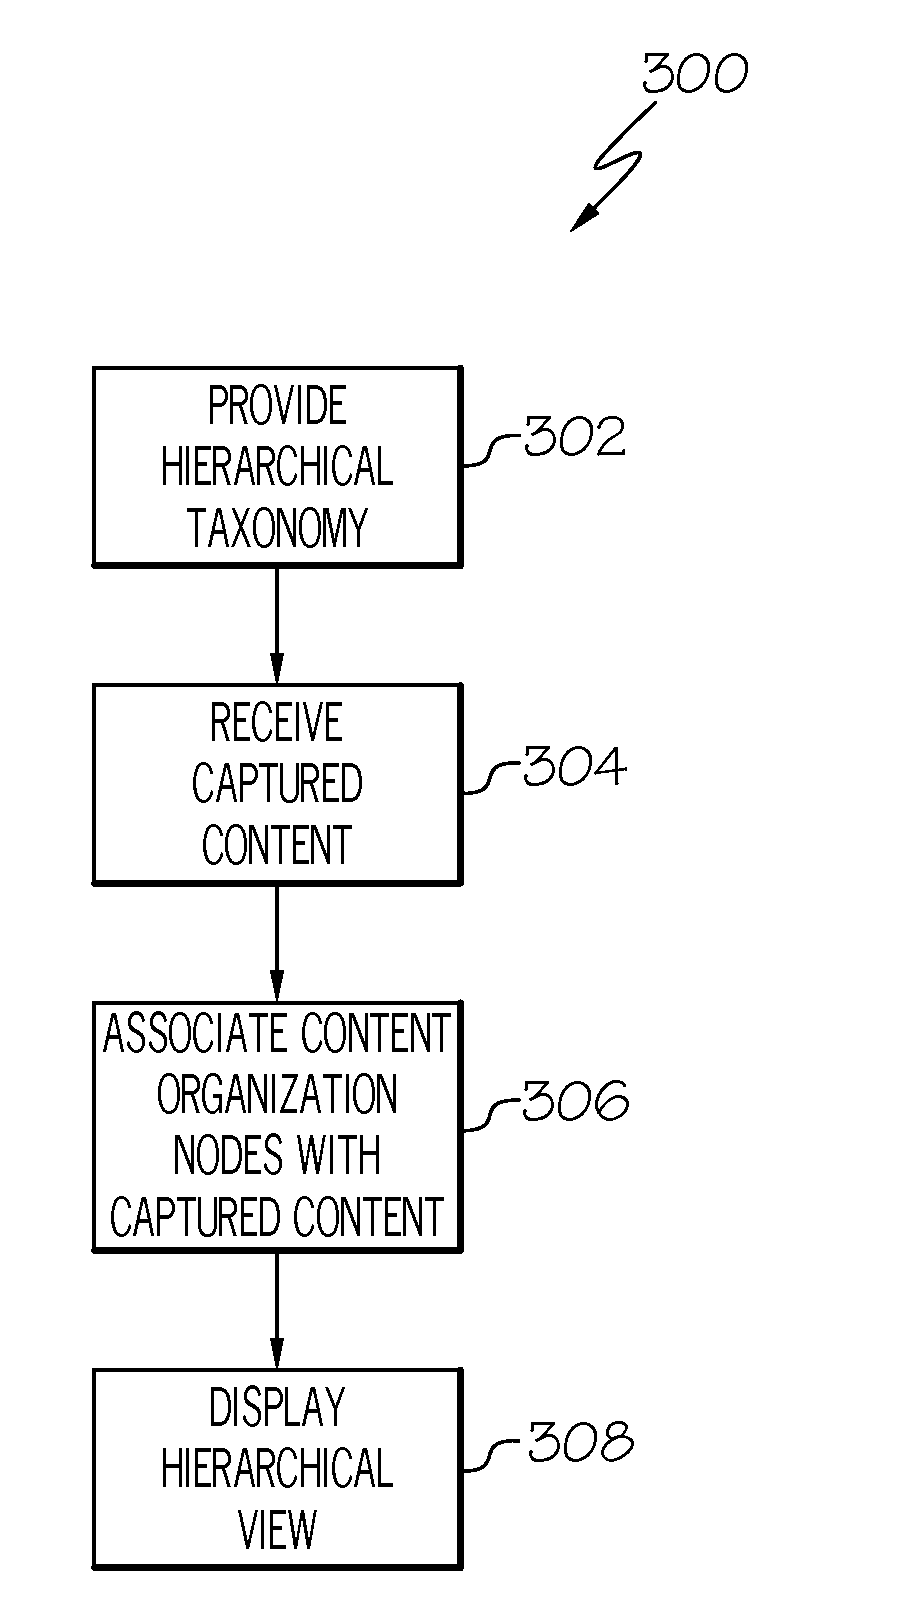 Systems and methods for providing for display hierarchical views of content organization nodes associated with captured content and for determining organizational identifiers for captured content